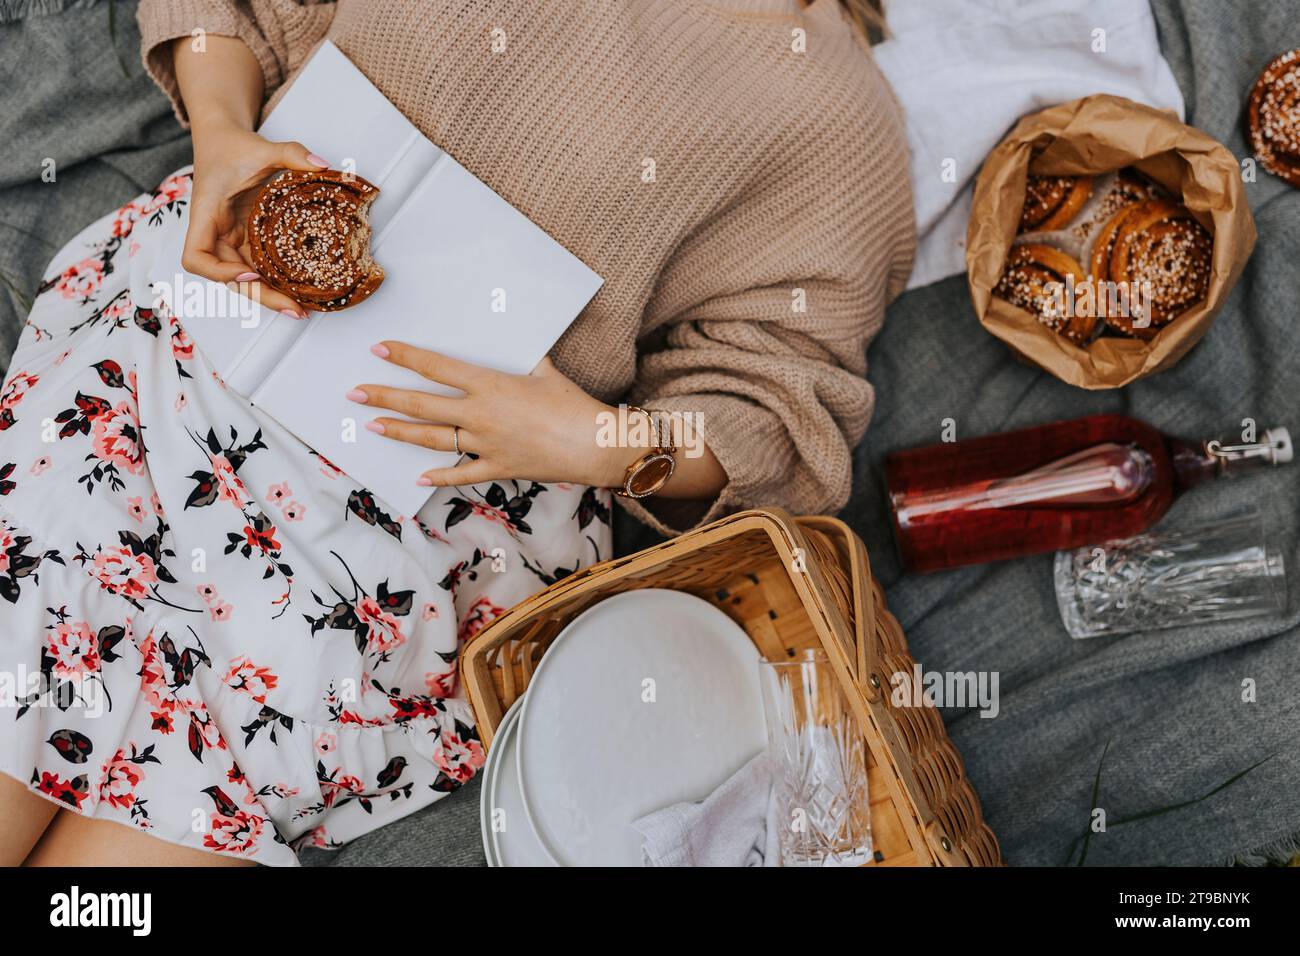 Mid section of woman lying on blanket with book and cinnamon bun Stock Photo